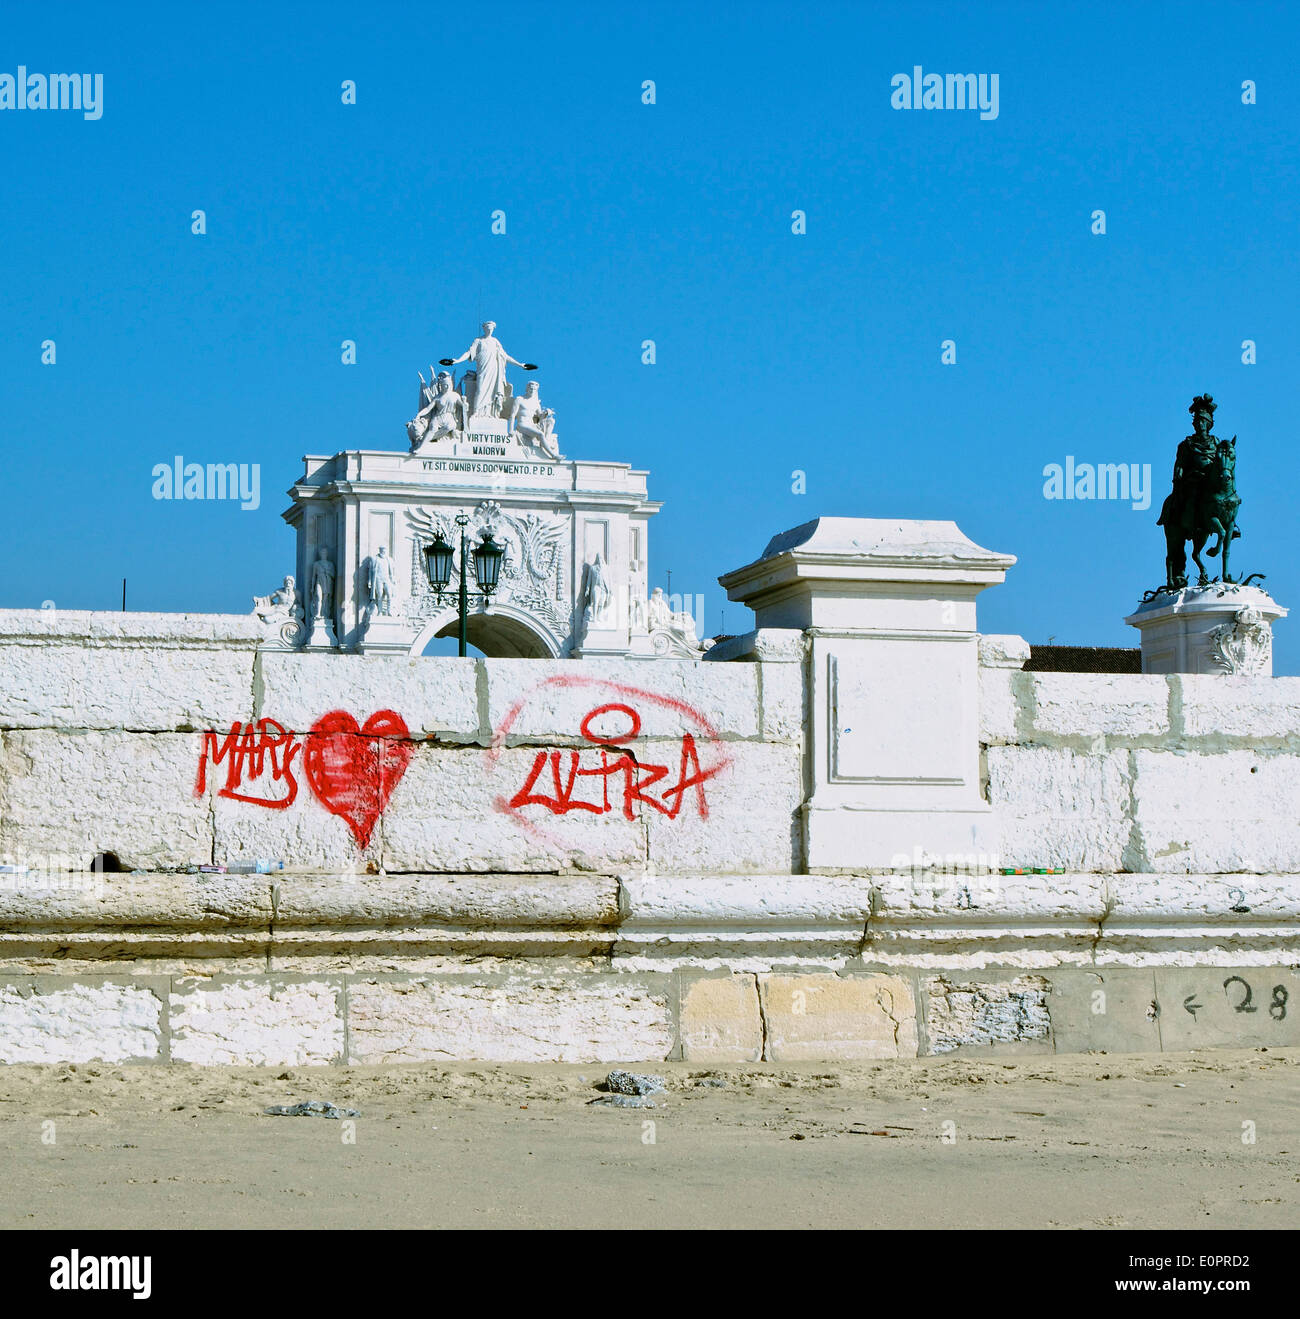 Graffiti on wall of riverfront Praca do Comercio with triumphal arch and statue of Dom Jose 1 Lisbon Portugal western Europe Stock Photo